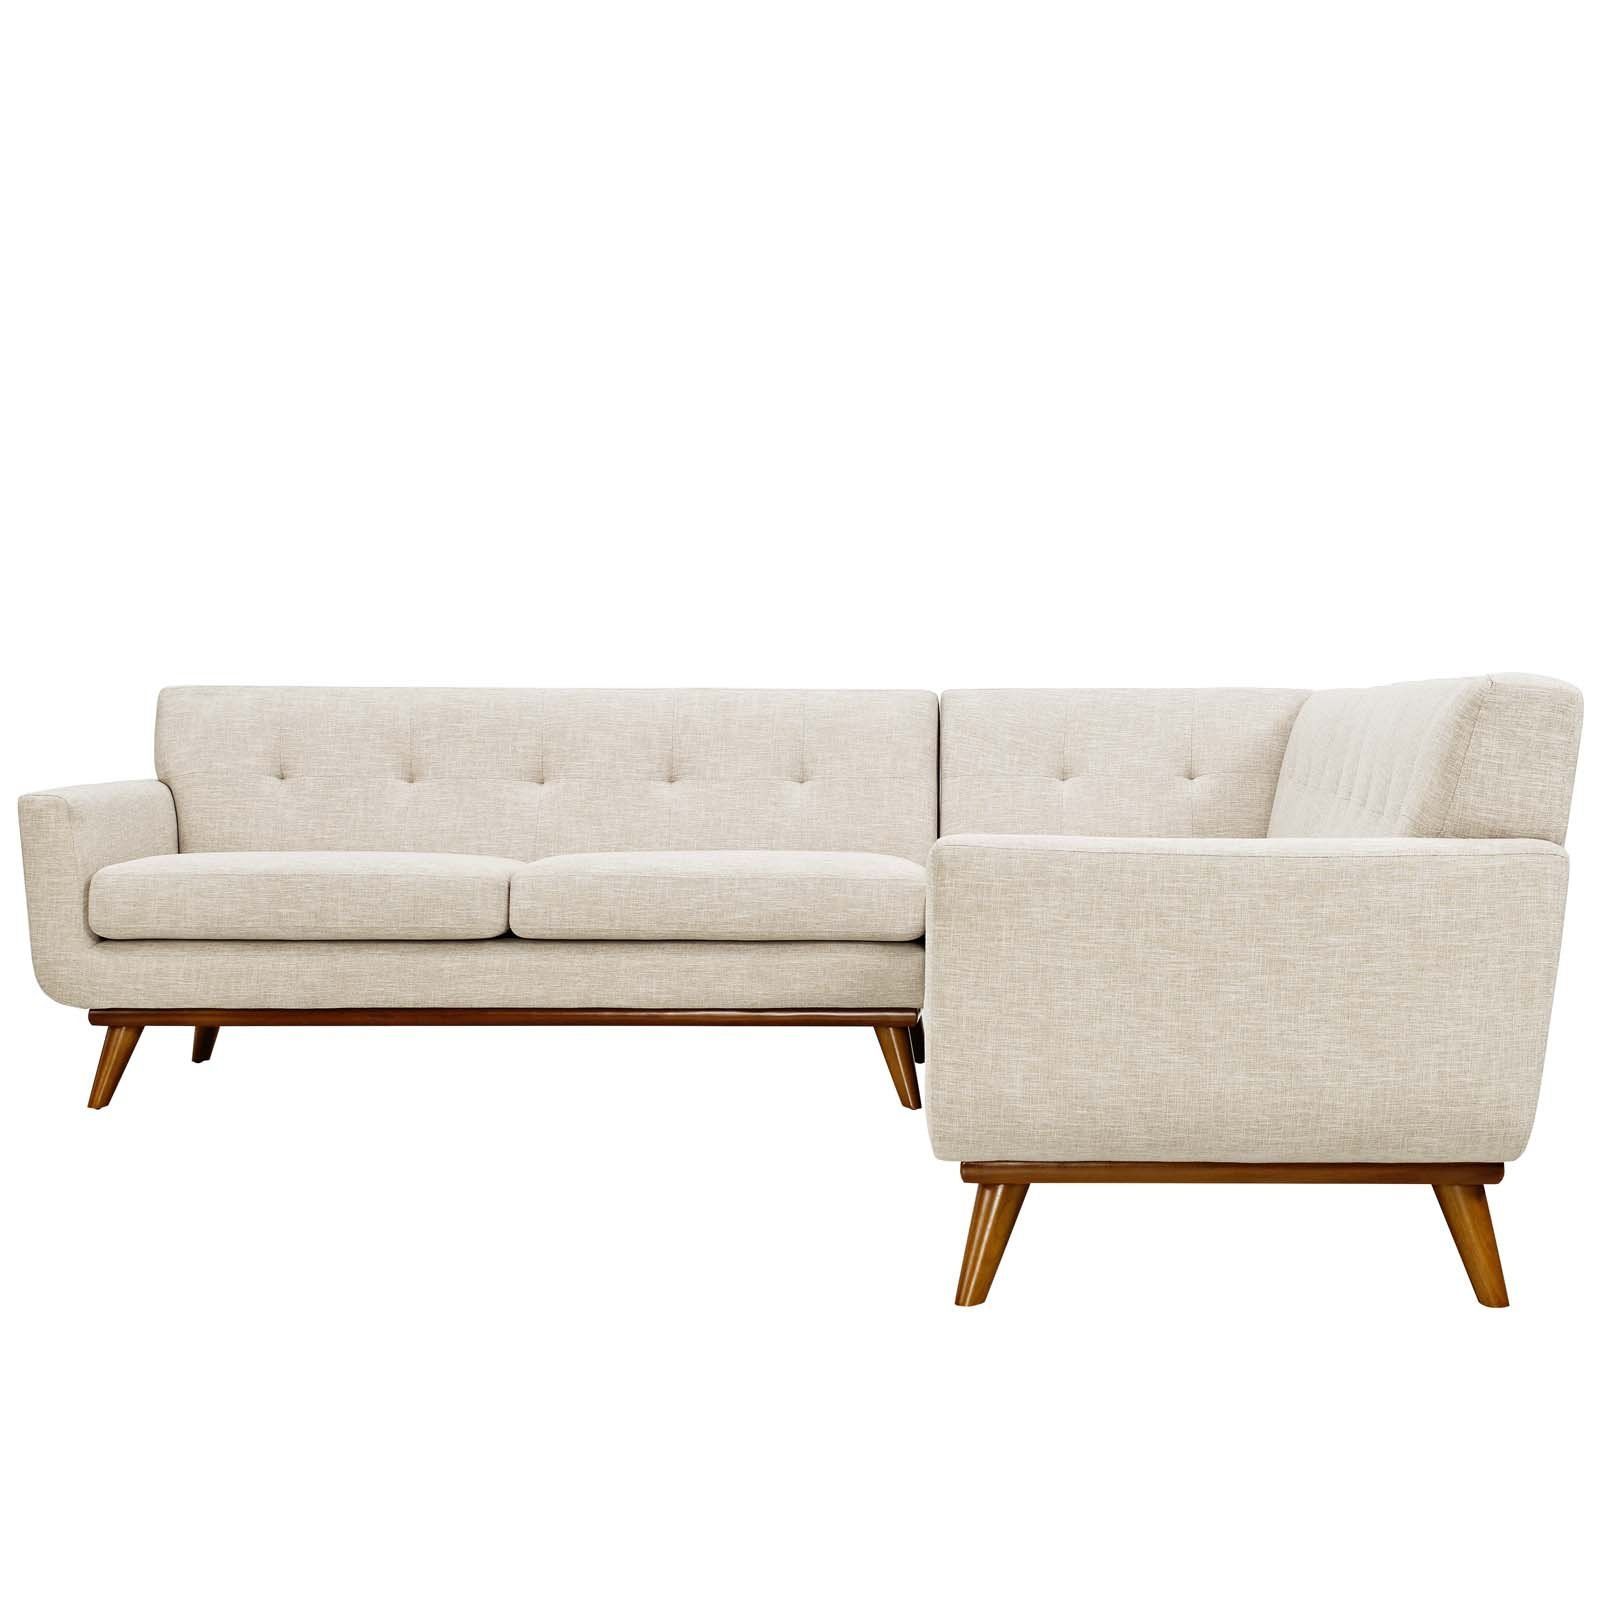 Engage L Shaped Sectional Sofa In Beige | Sectional Sofa Beige, Fabric Within Small L Shaped Sectional Sofas In Beige (Gallery 15 of 21)